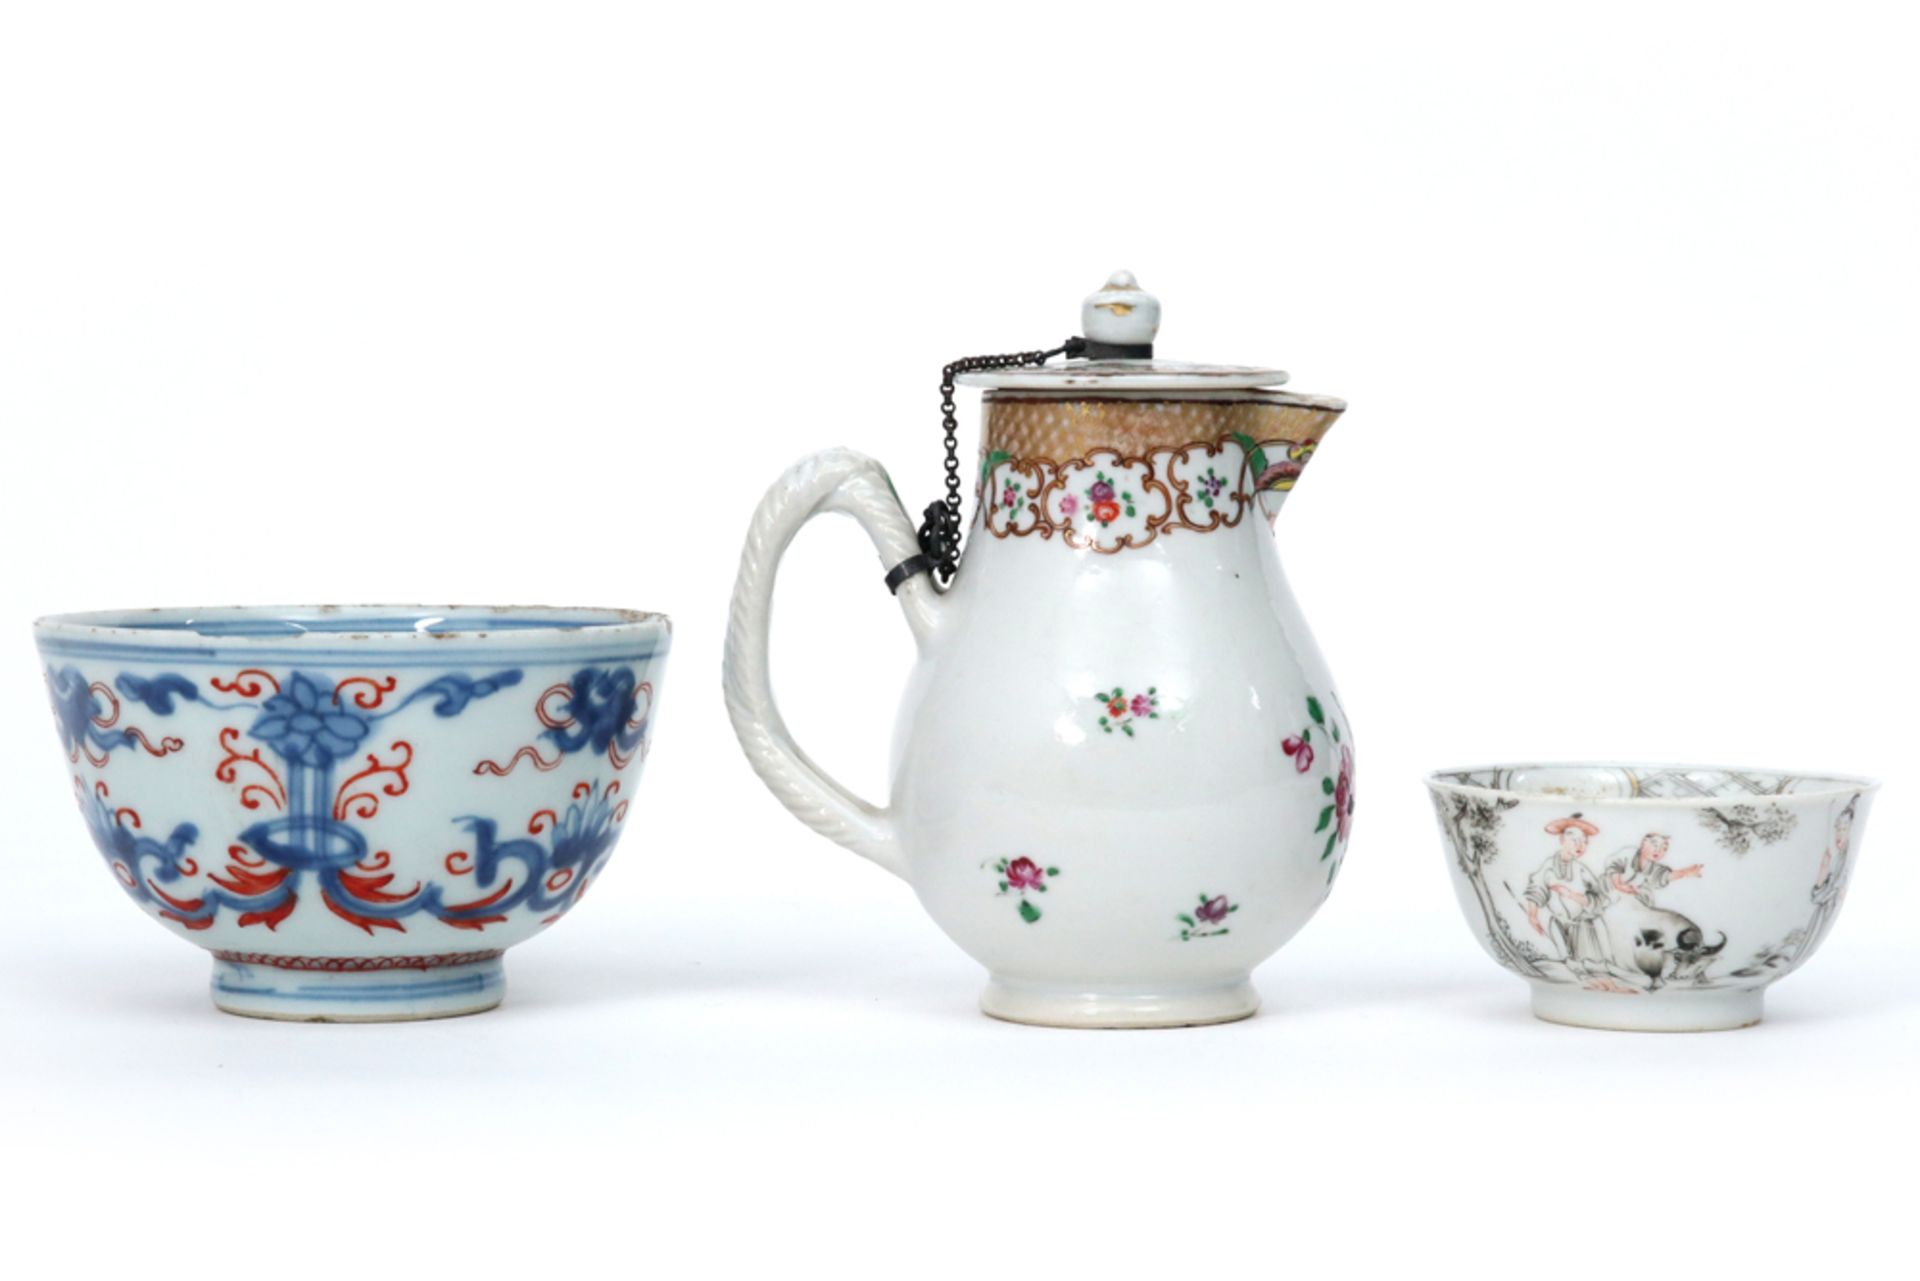 three 18th Cent. Chinese items in porcelain with polychrome decor : a bowl, a lidded milkpot and a